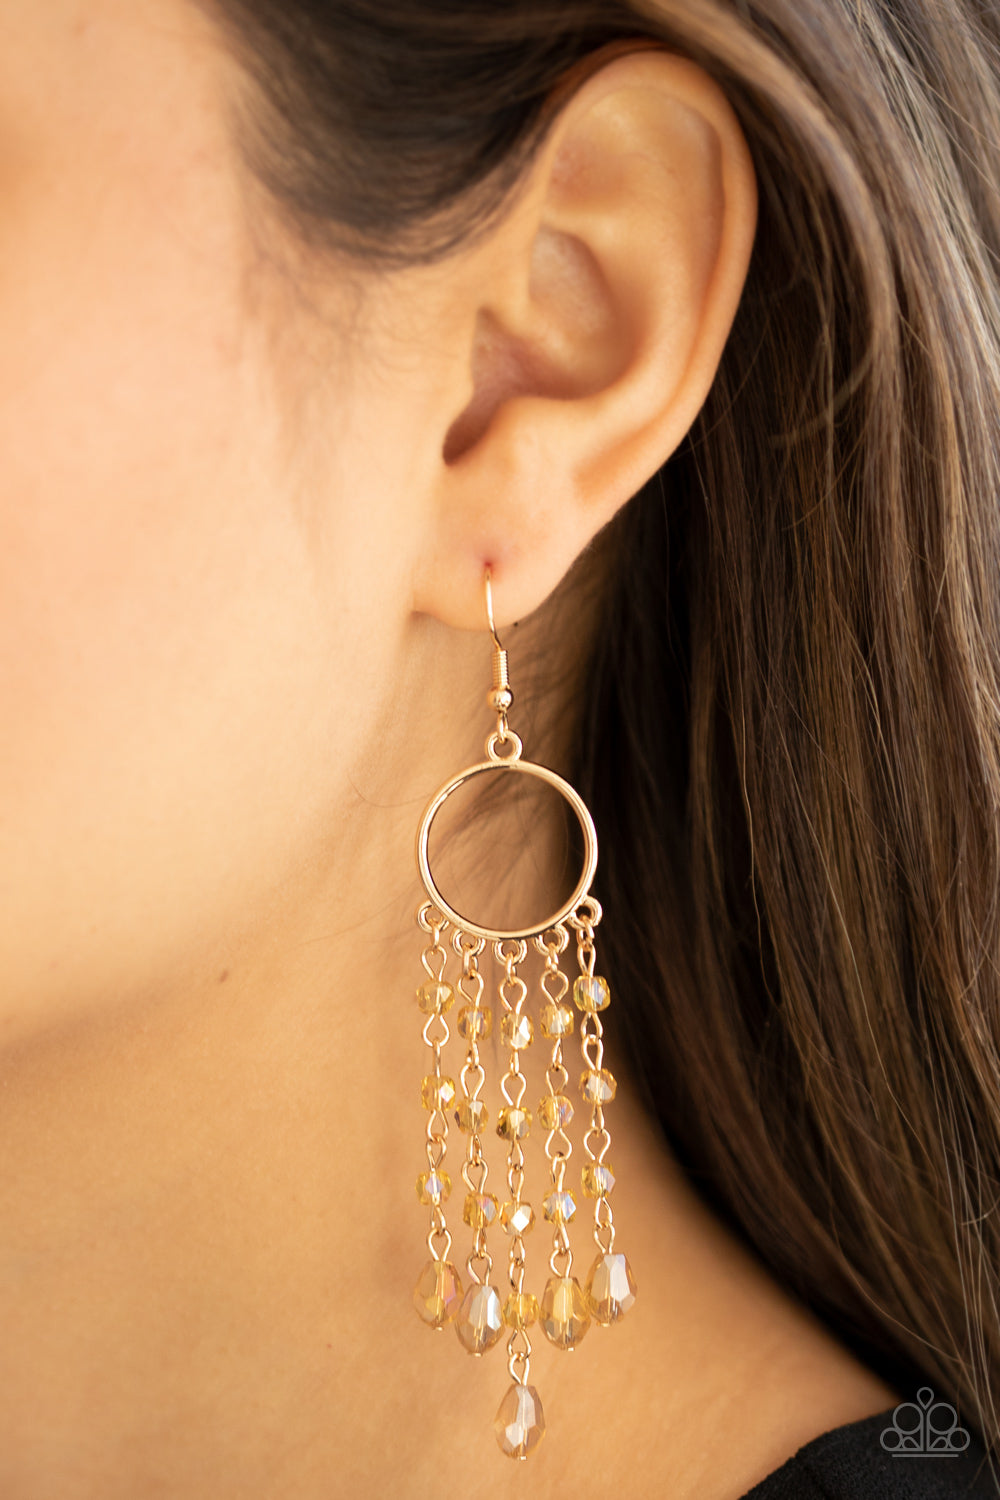 Dazzling Delicious Gold Earring - Paparazzi Accessories  Glittery rows of iridescently golden crystal-like beads stream from the bottom of a dainty gold hoop, creating a dazzling chandelier. Earring attaches to a standard fishhook fitting.  ﻿All Paparazzi Accessories are lead free and nickel free!  Sold as one pair of earrings.